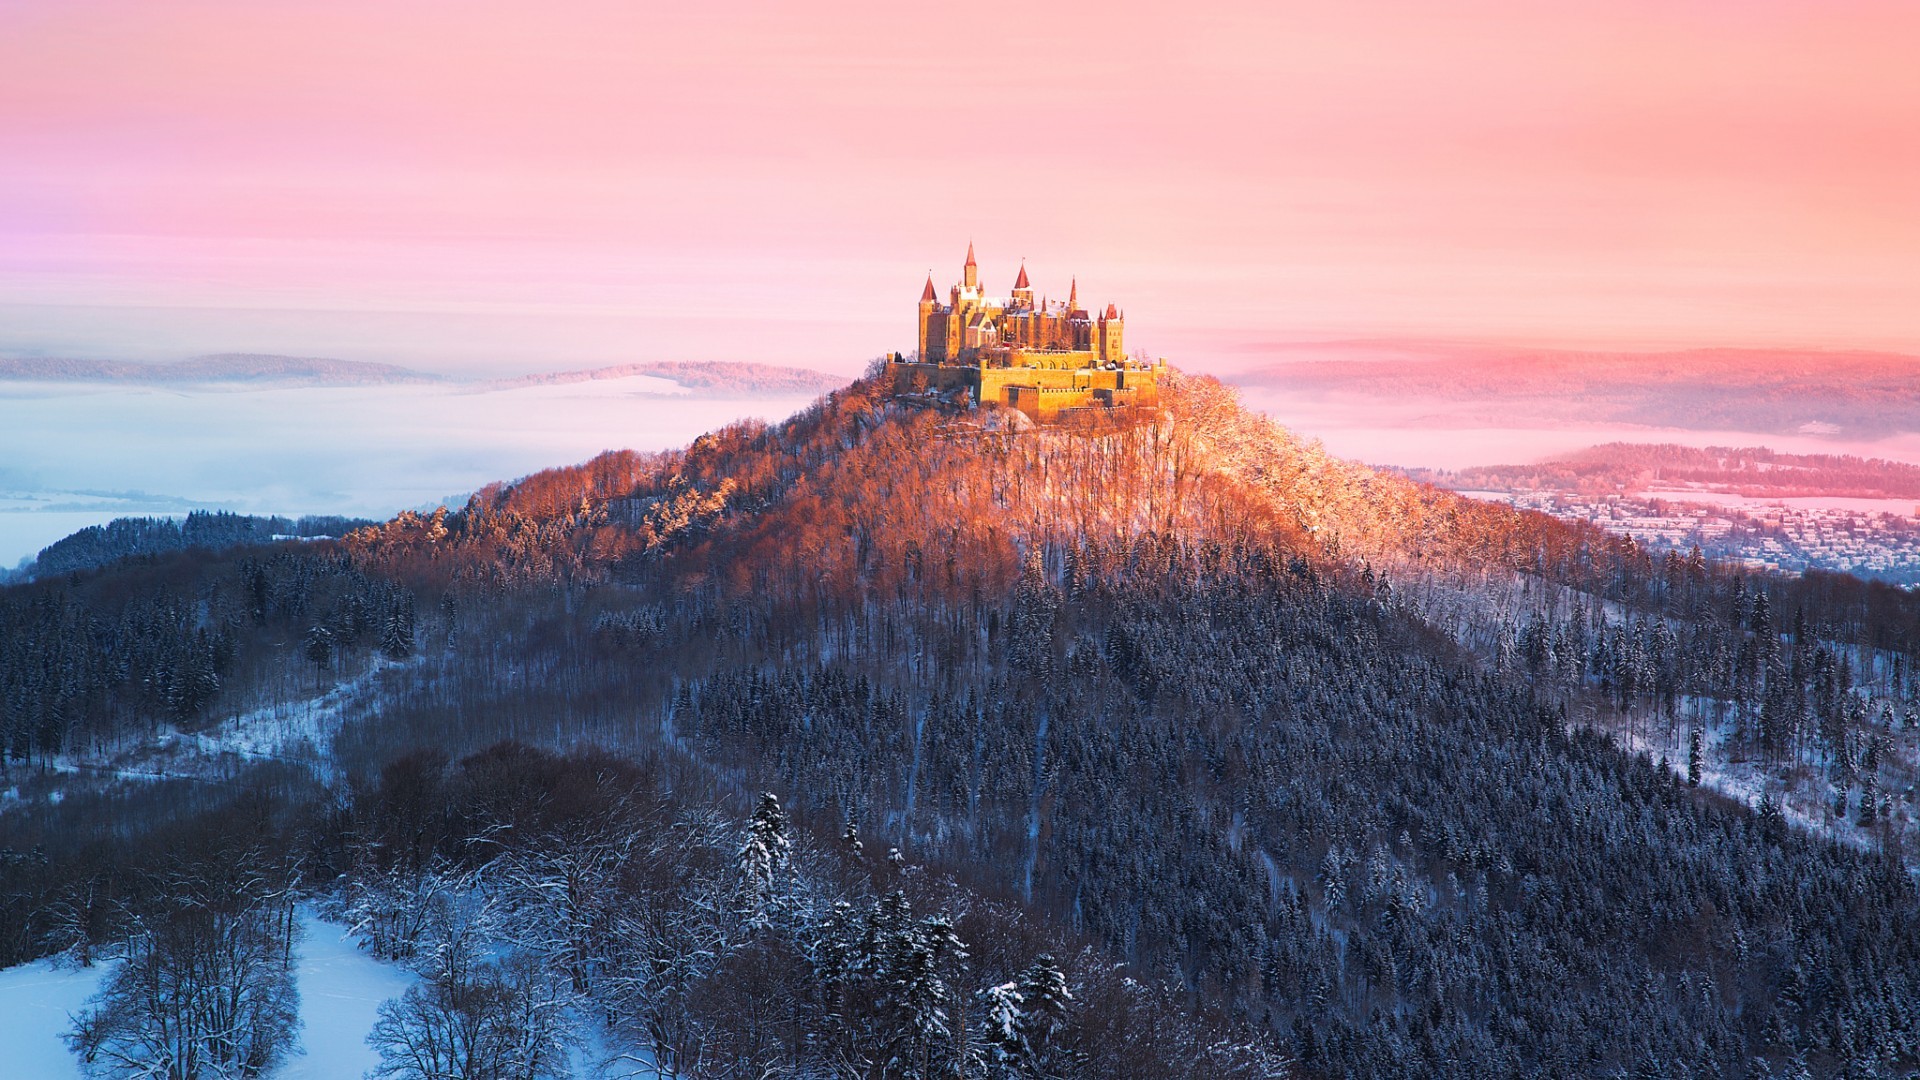 General 1920x1080 nature landscape building clouds hills trees forest Hohenzollern Castle castle Germany winter snow mist sunset